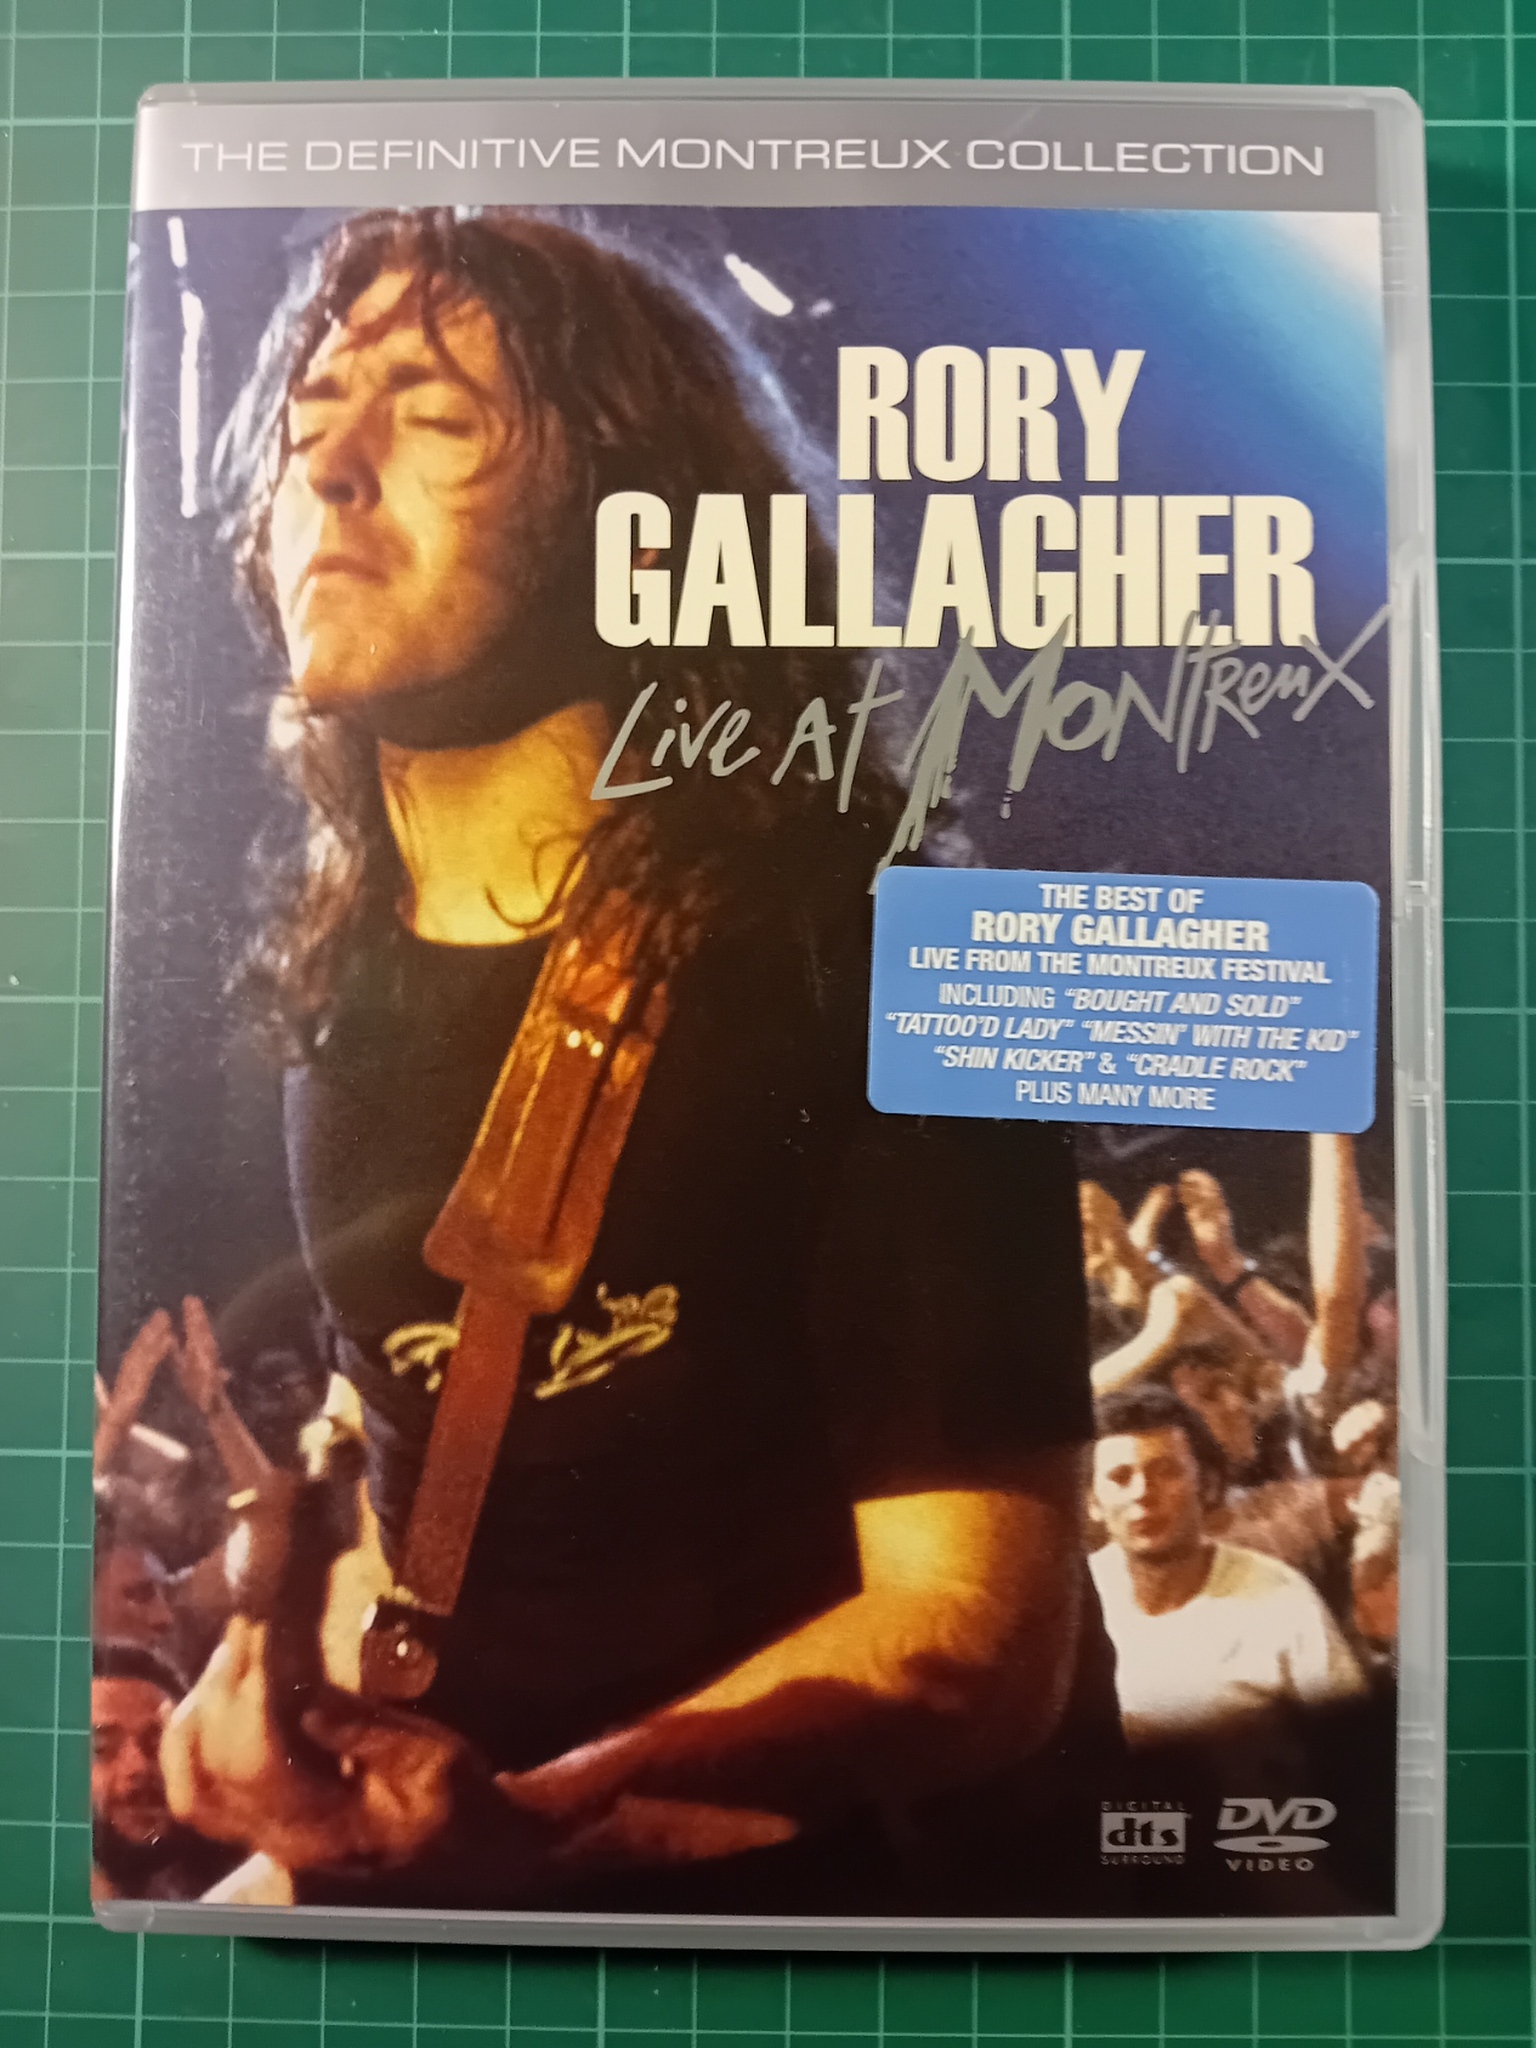 DVD : Rory Gallagher : Live at Montreux (konsert film)